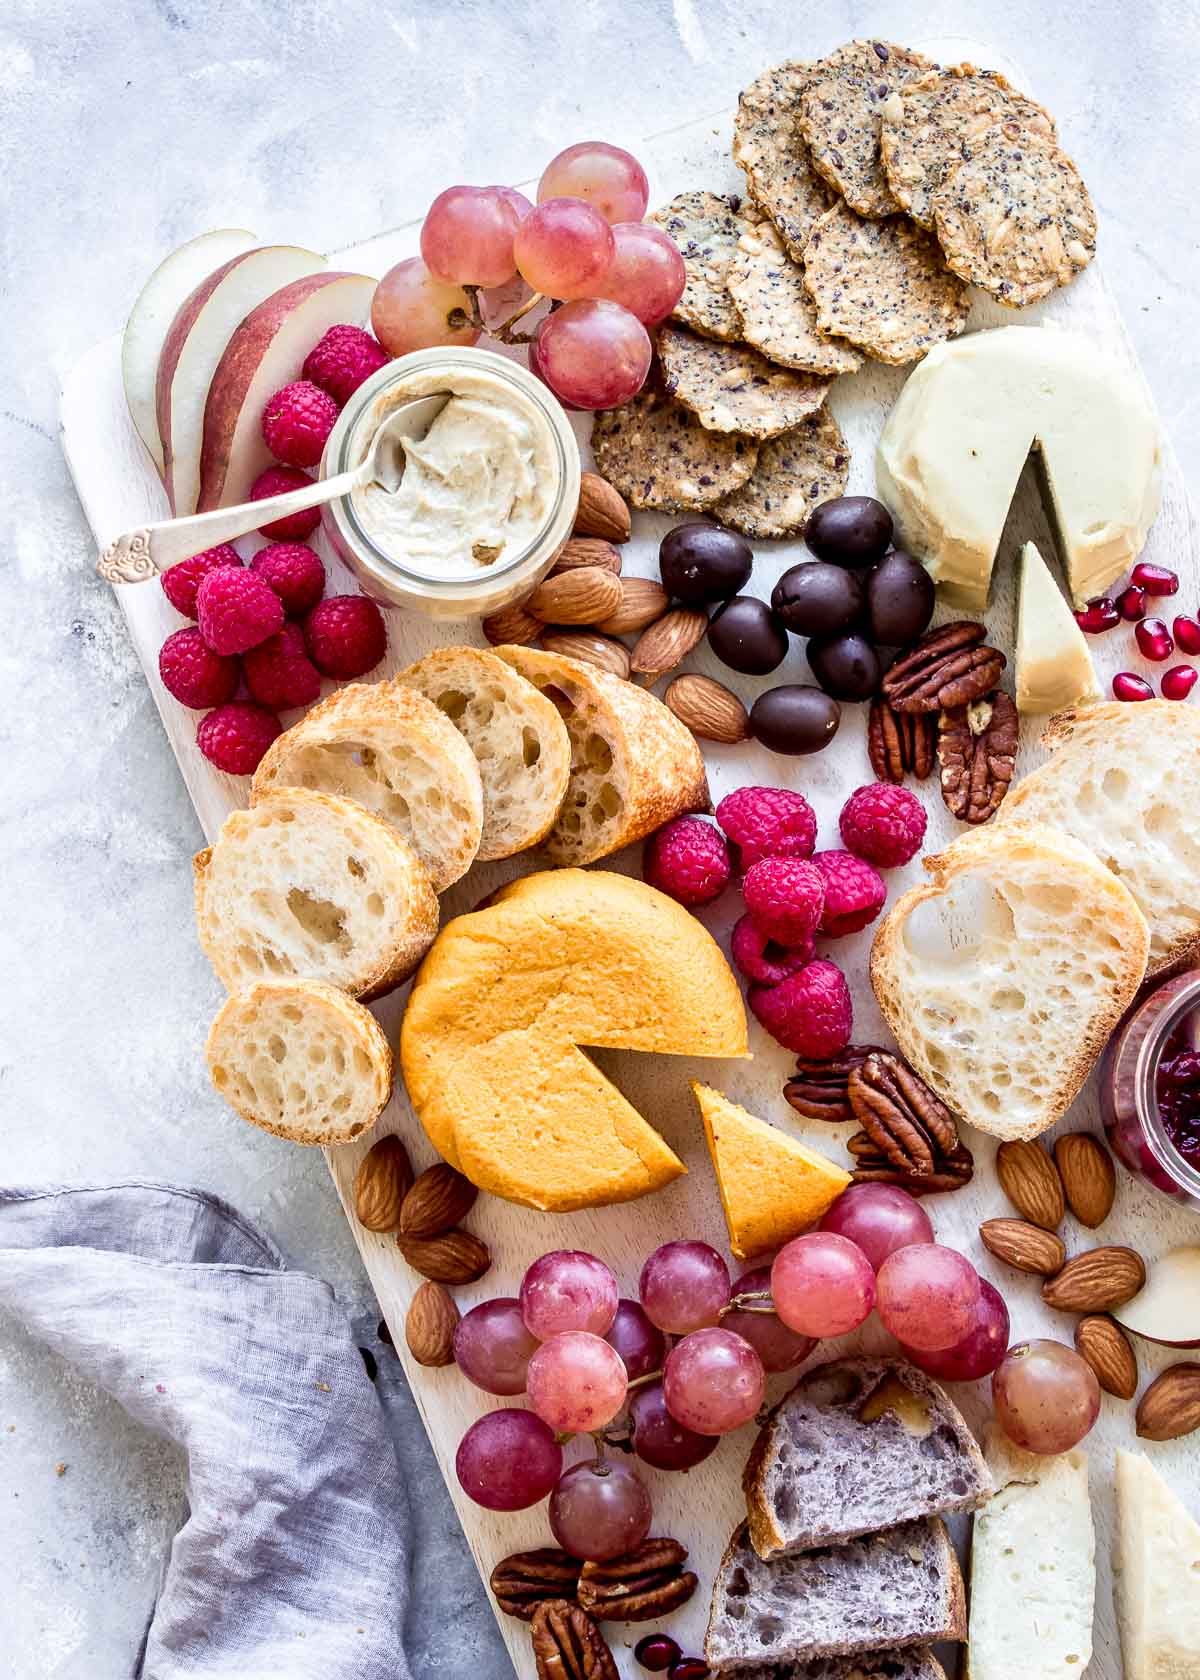 Vegan cheese board showing multiple hard cheeses, berries, bread and crackers.